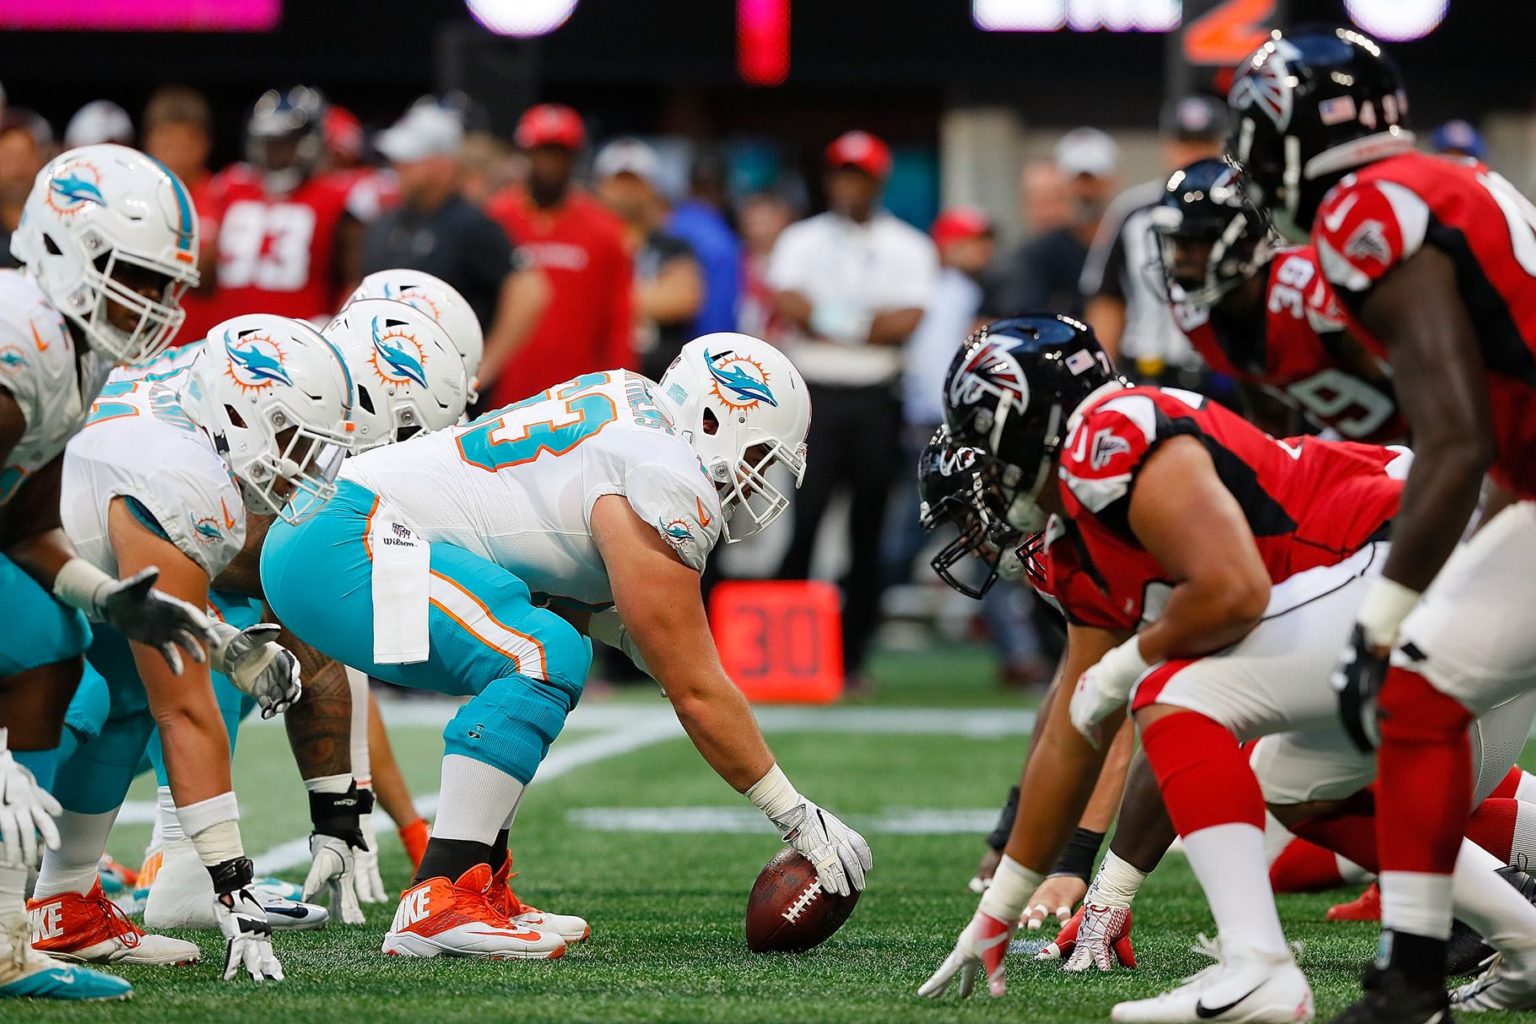 Previewing the Dolphins game against the Atlanta Falcons